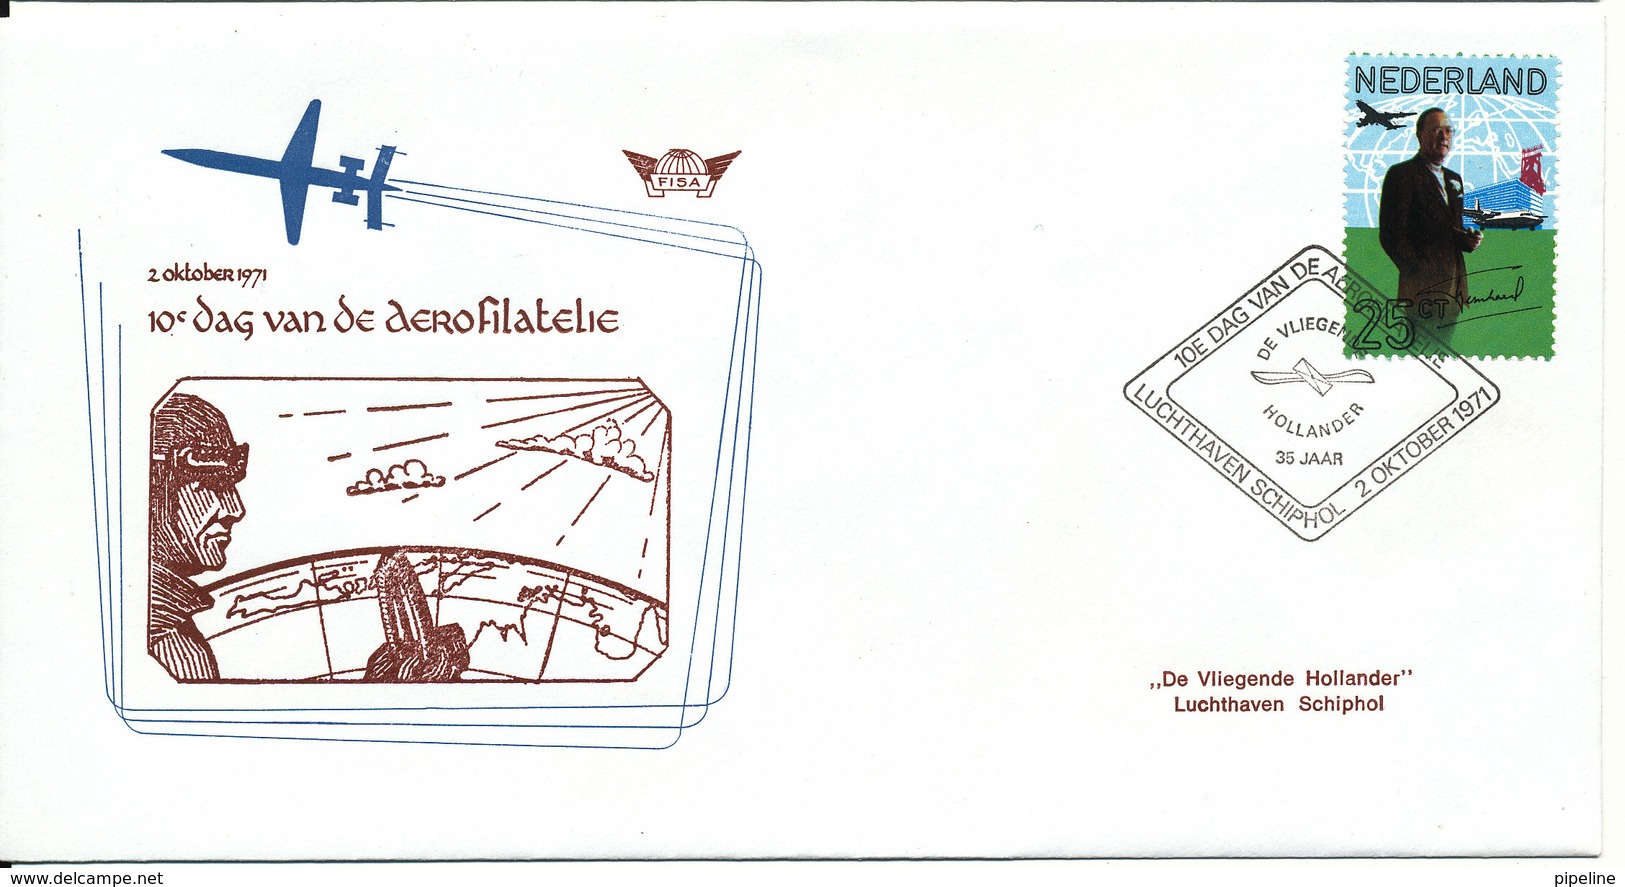 Netherlands Cover With Special Postmark And Cachet 10th Aerophilatelie Day Schiphol 2-10-1971 - Covers & Documents